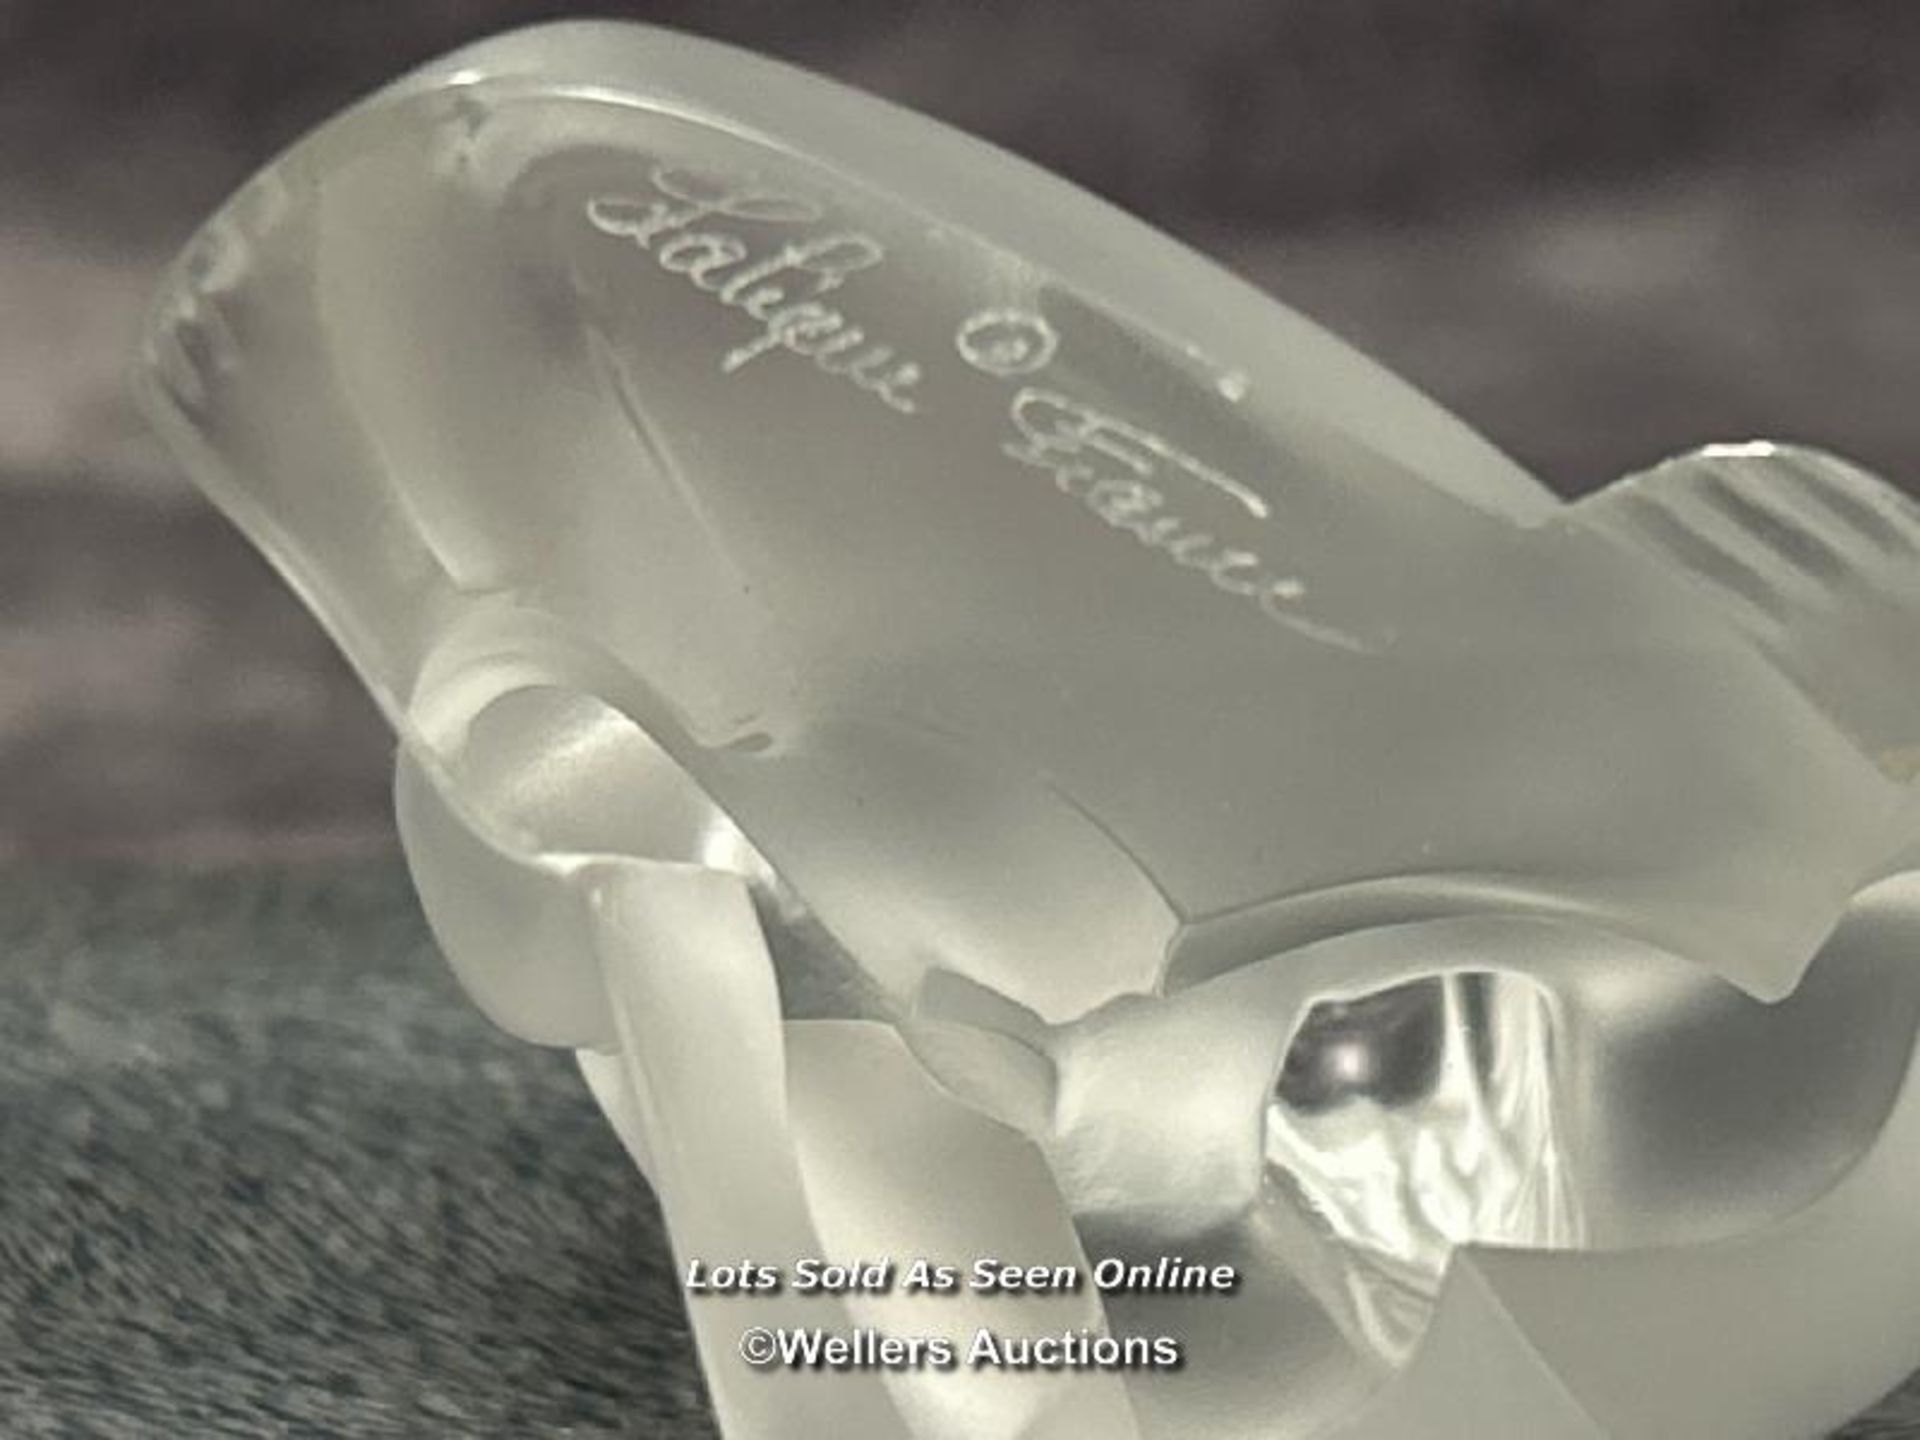 Lalique frosted crystal figurine of a seated woman in "thinking" pose, 8.5cm high / AN2 - Image 3 of 3